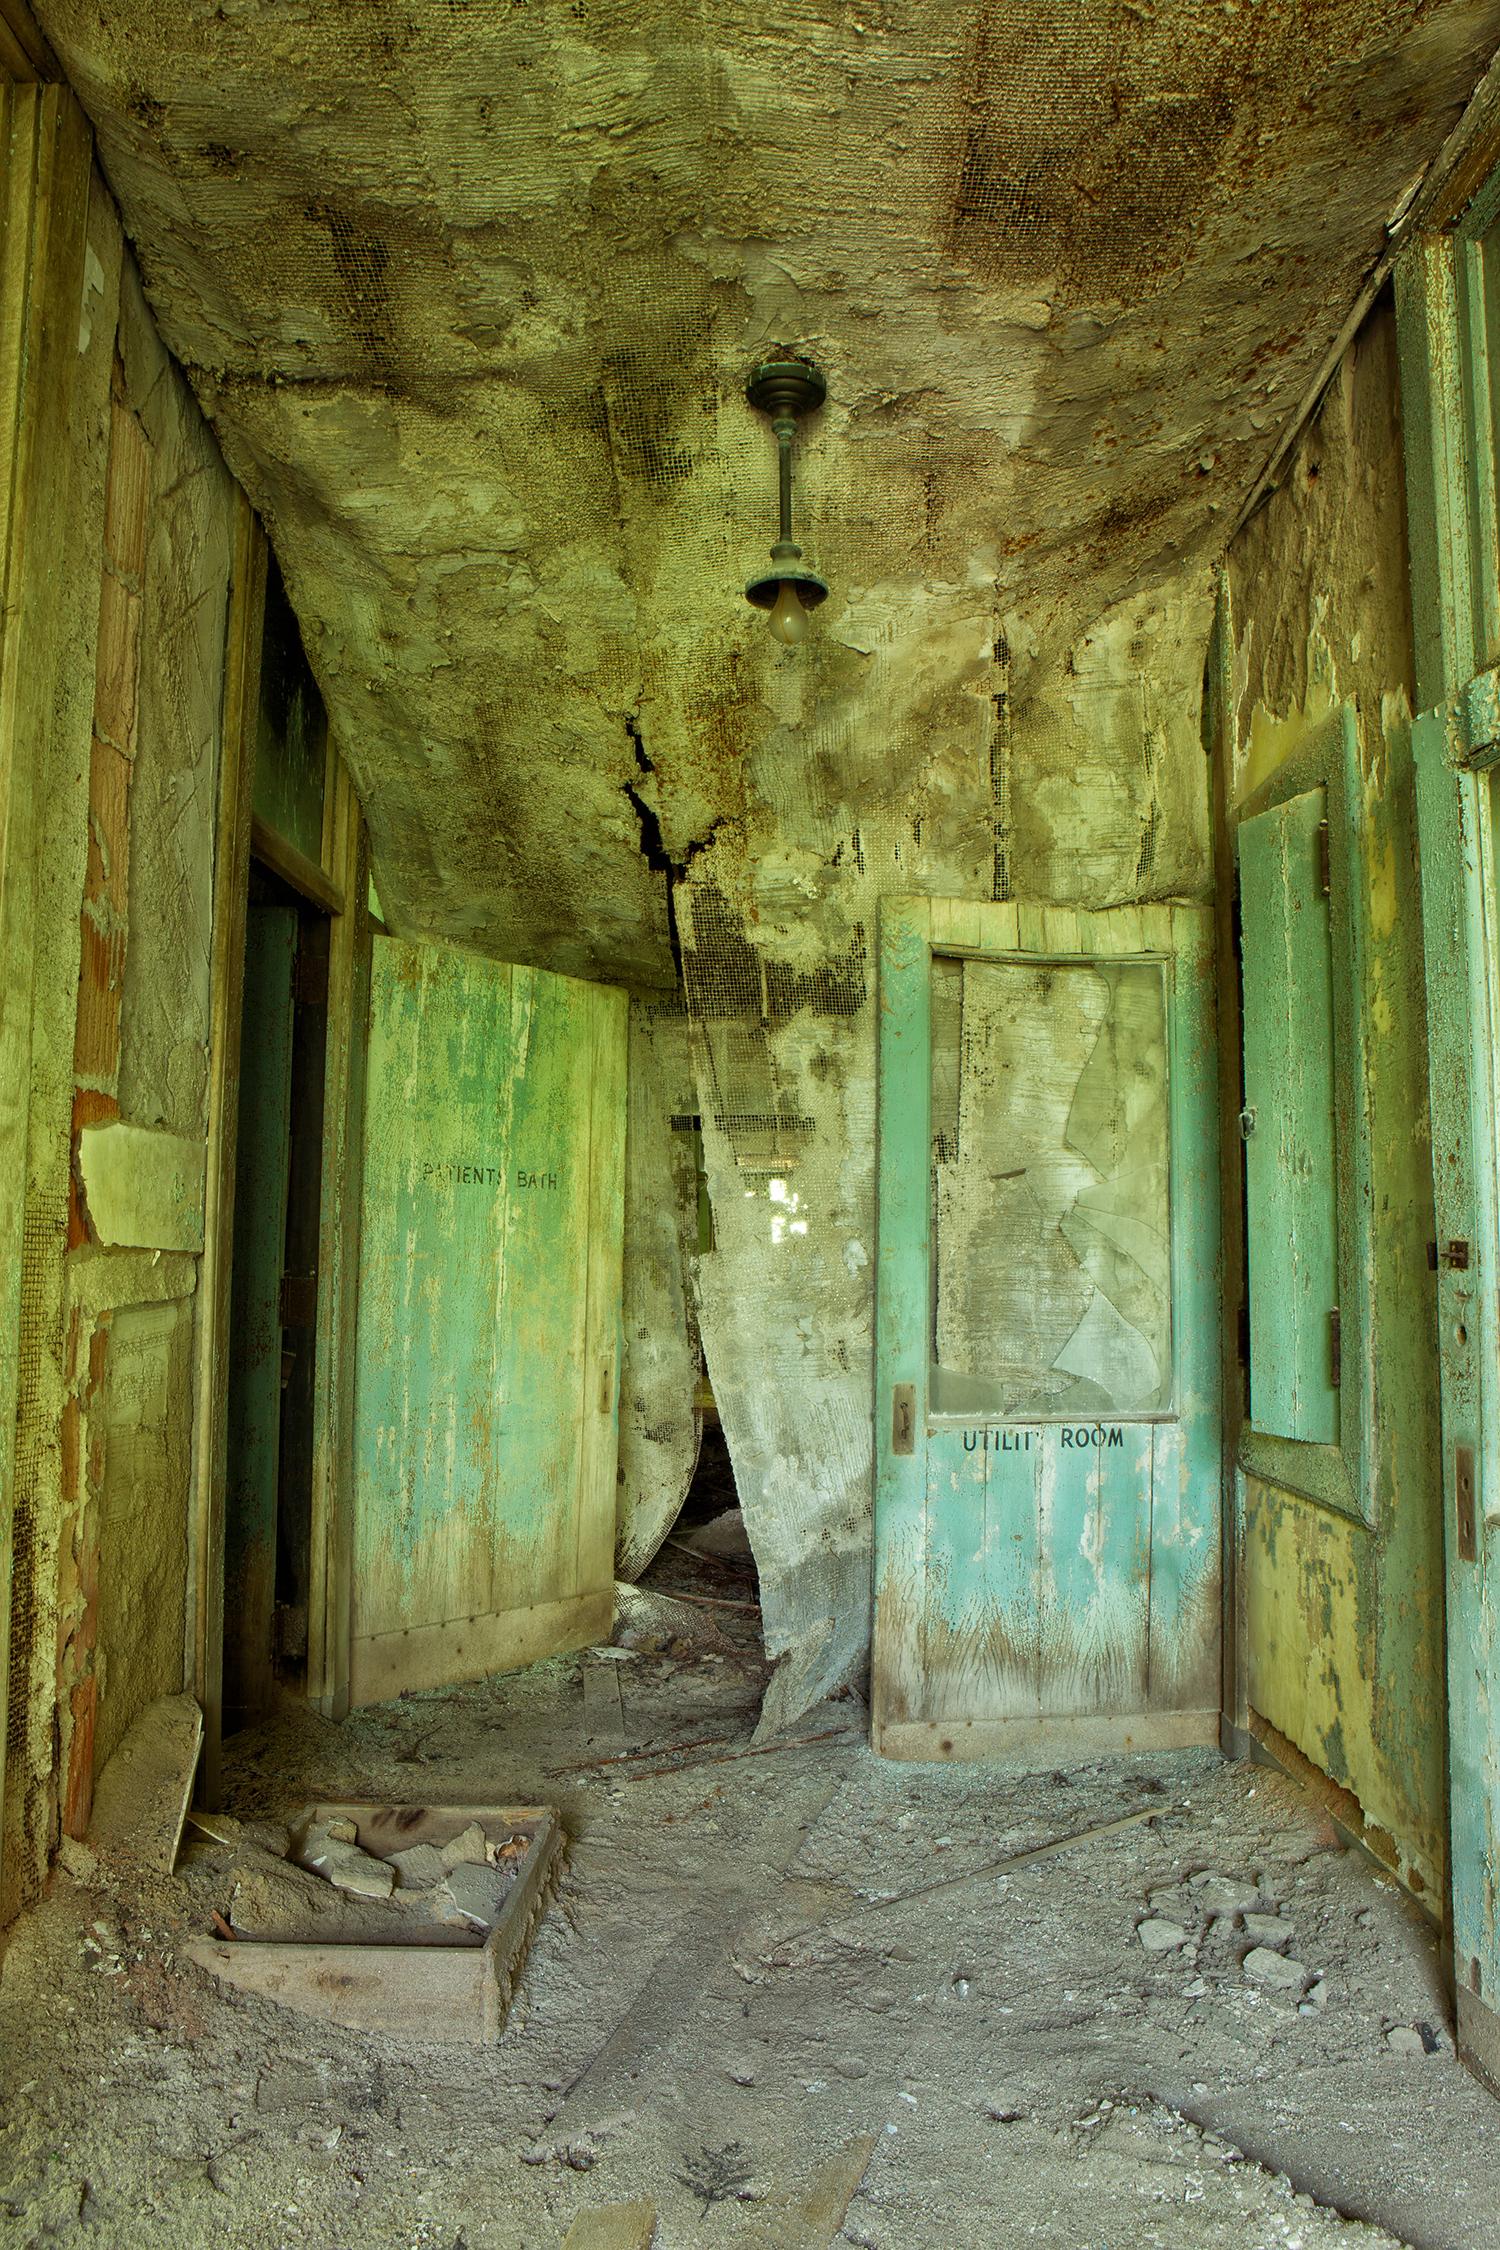 "To Dust", interior, abandoned place, architecture, green, color photograph - Photograph by Rebecca Skinner